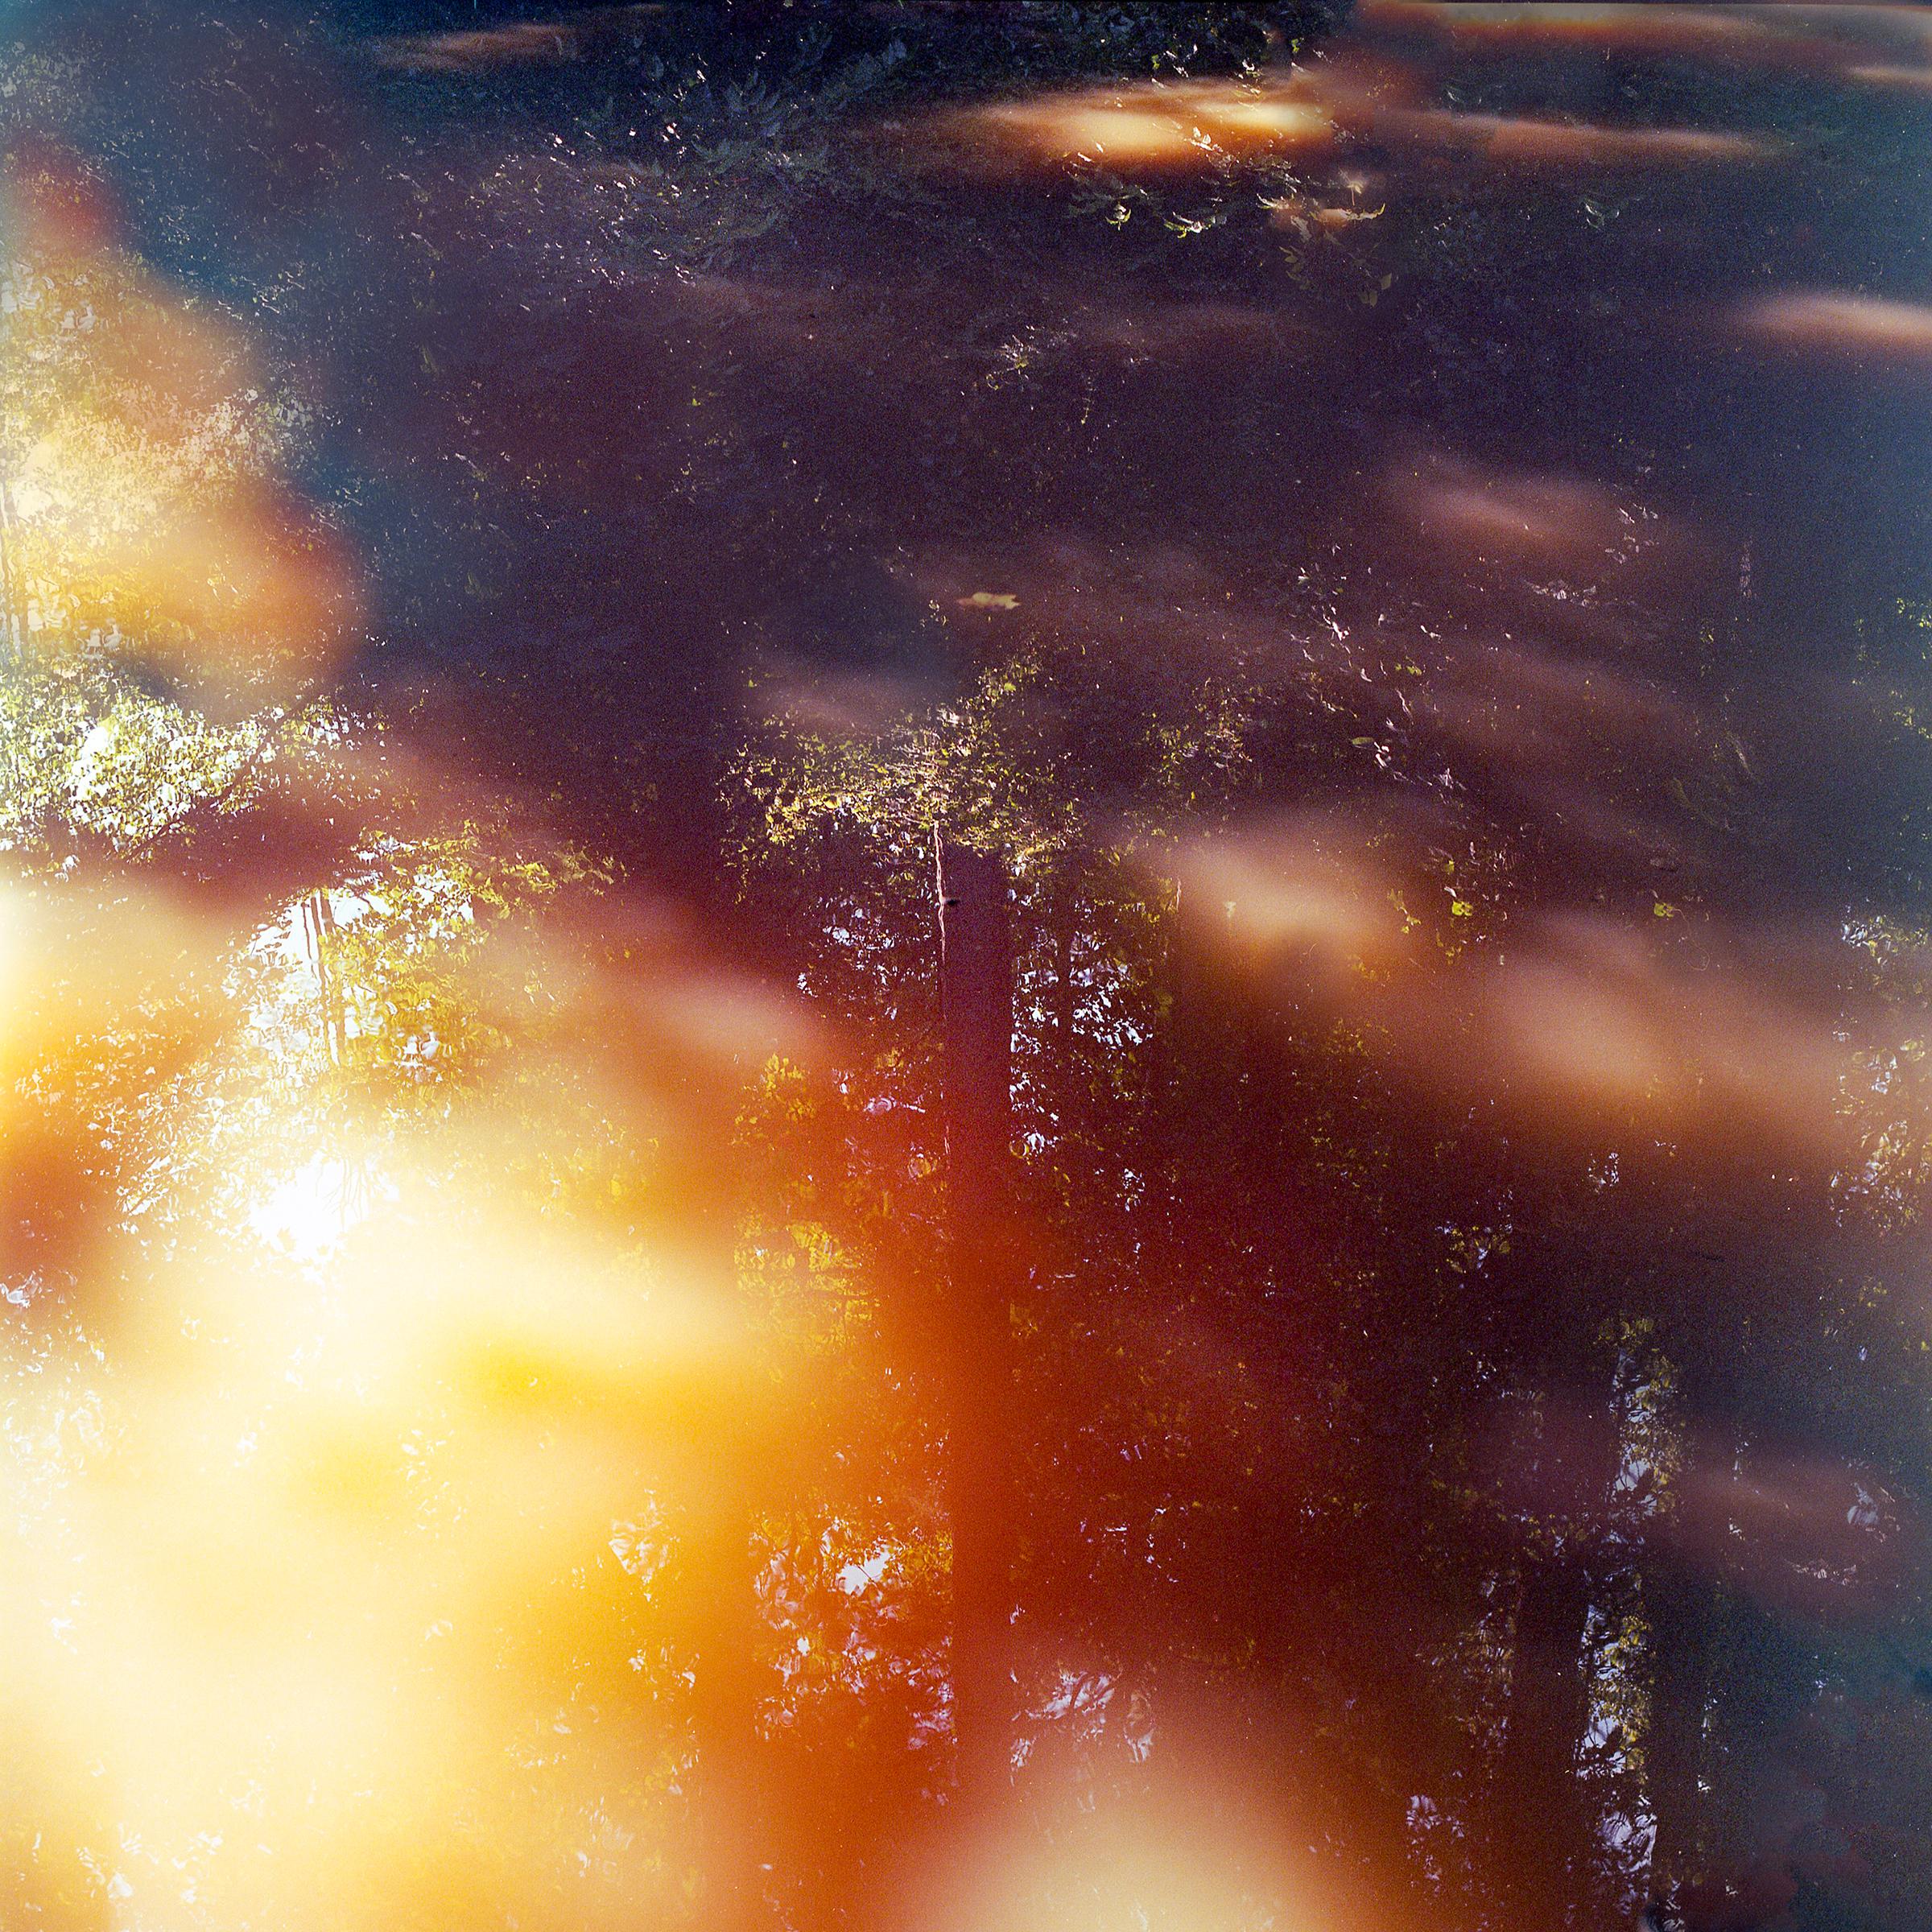 Virginie Kippelen-Drujon Color Photograph - 'Yellow Reflections' - film photography - nature - fall - leaves - wilderness 